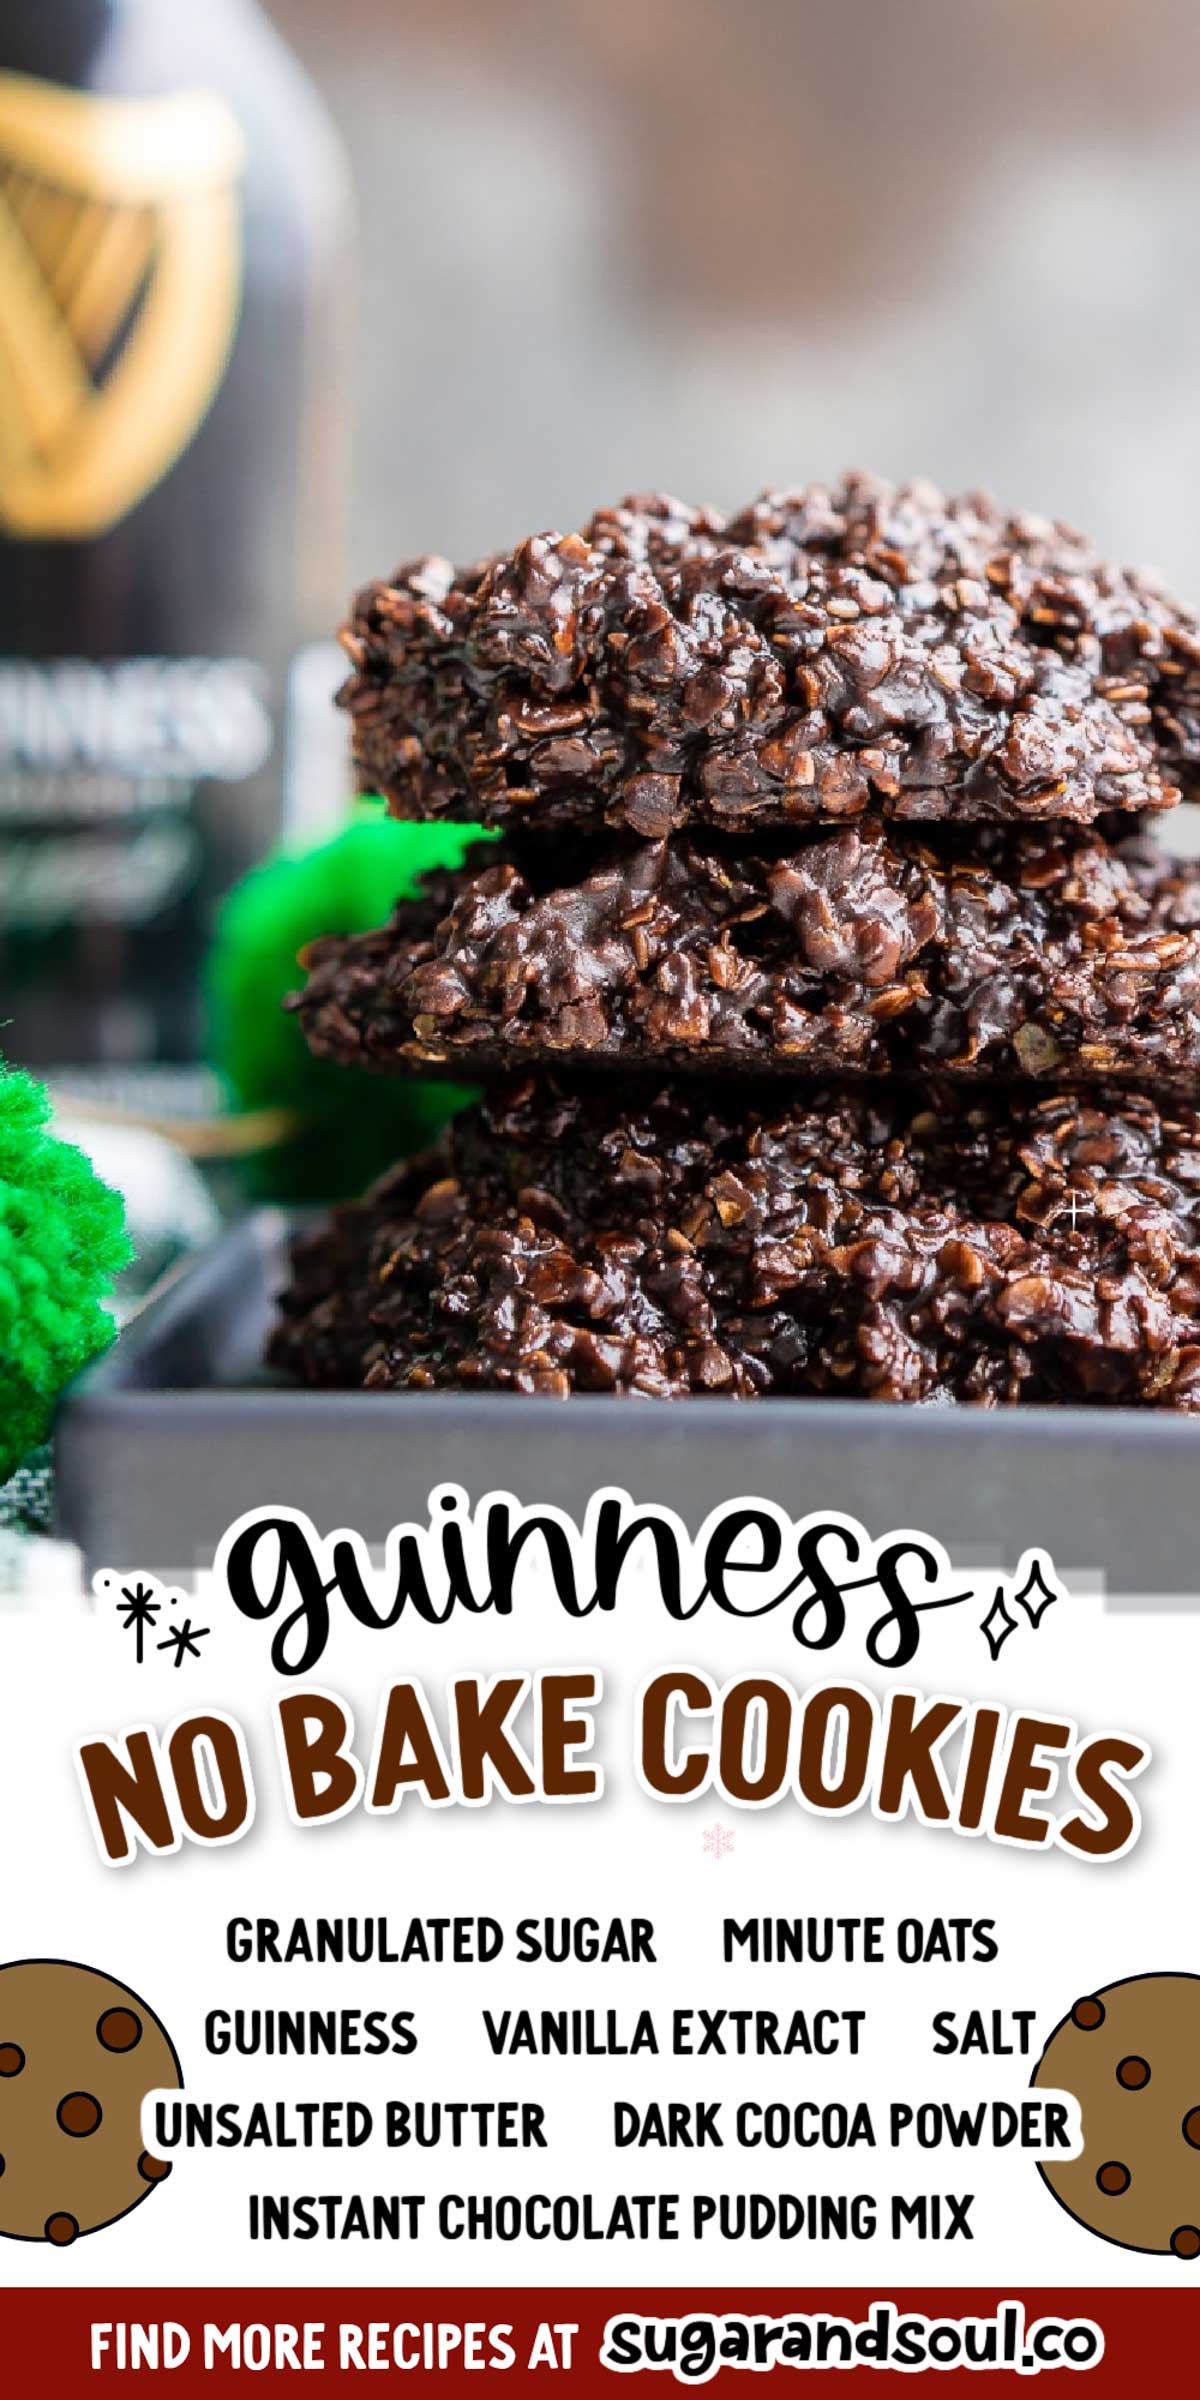 Dark Chocolate Guinness No Bake Cookies are a rich, delicious, and easy dessert for St. Patrick's Day that's made with Irish stout. via @sugarandsoulco